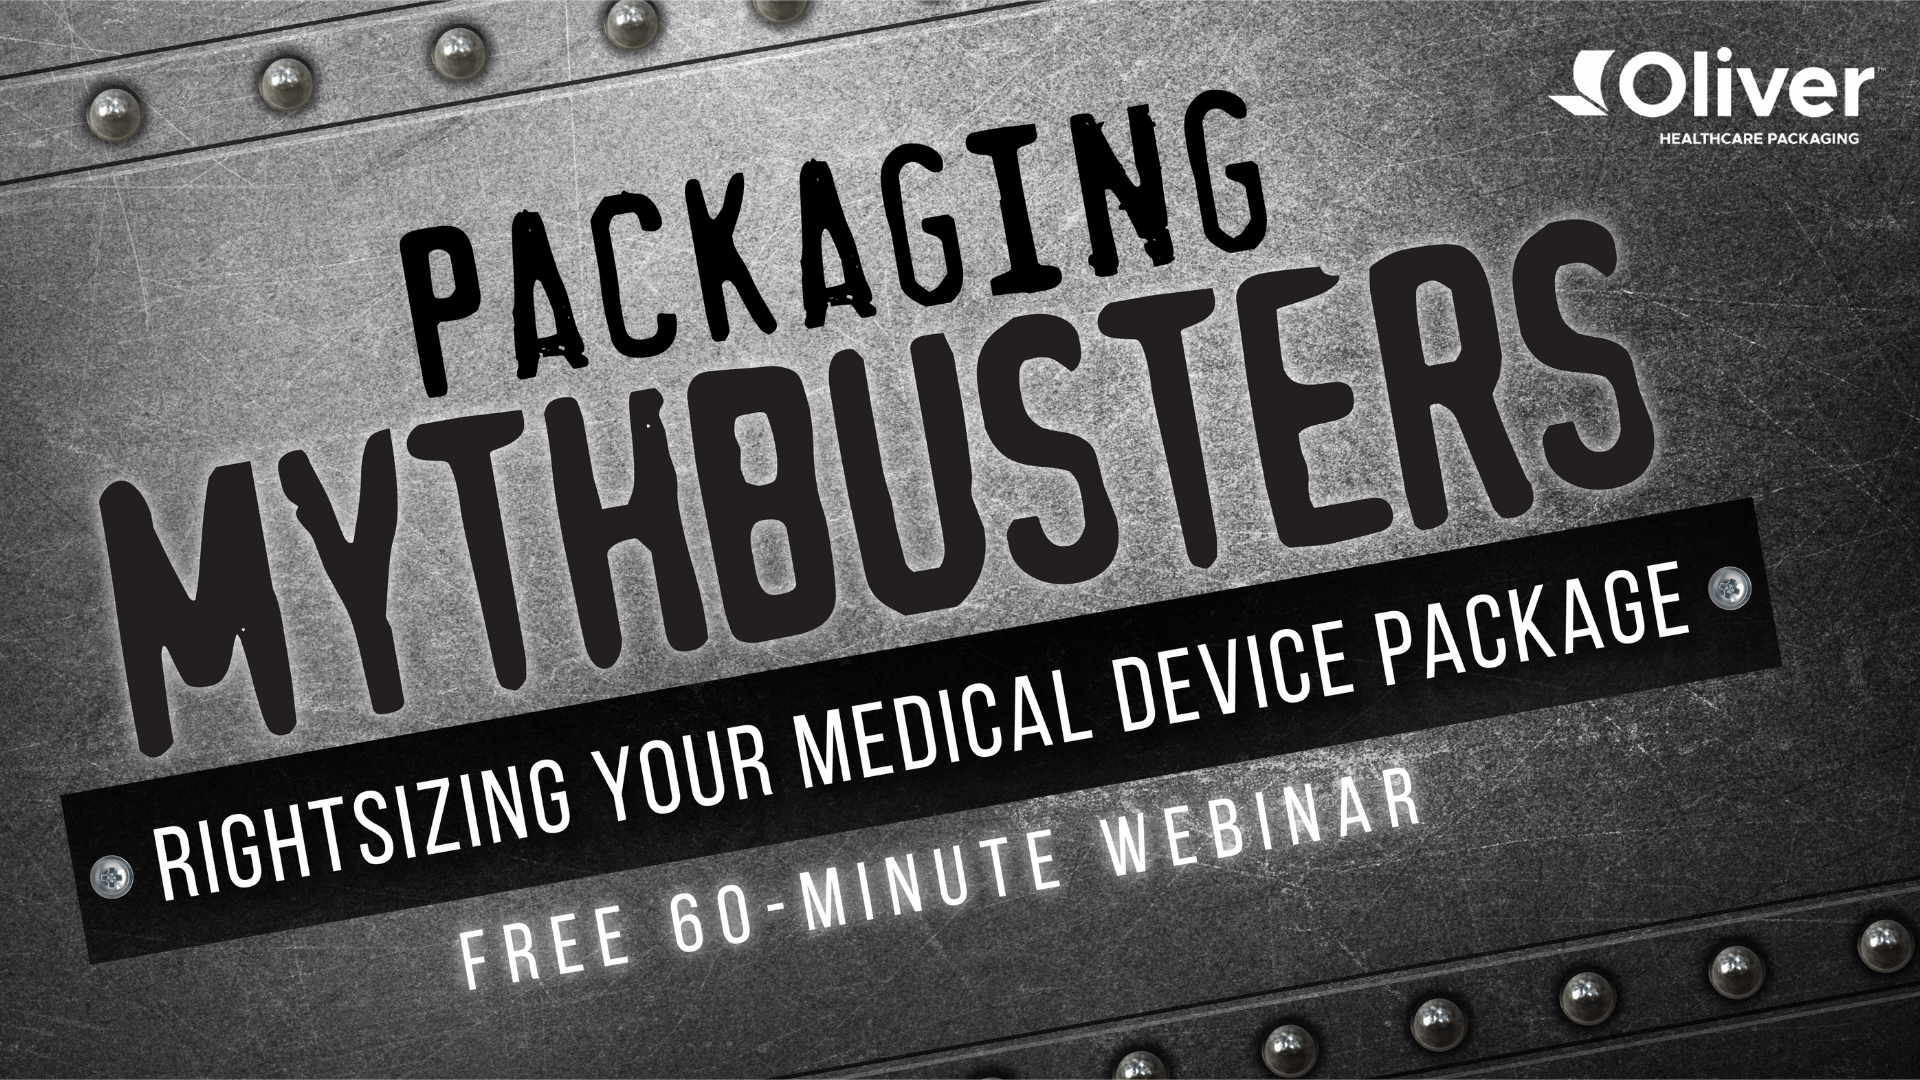 Packaging MythBusters: Rightsizing our Medical Device Package